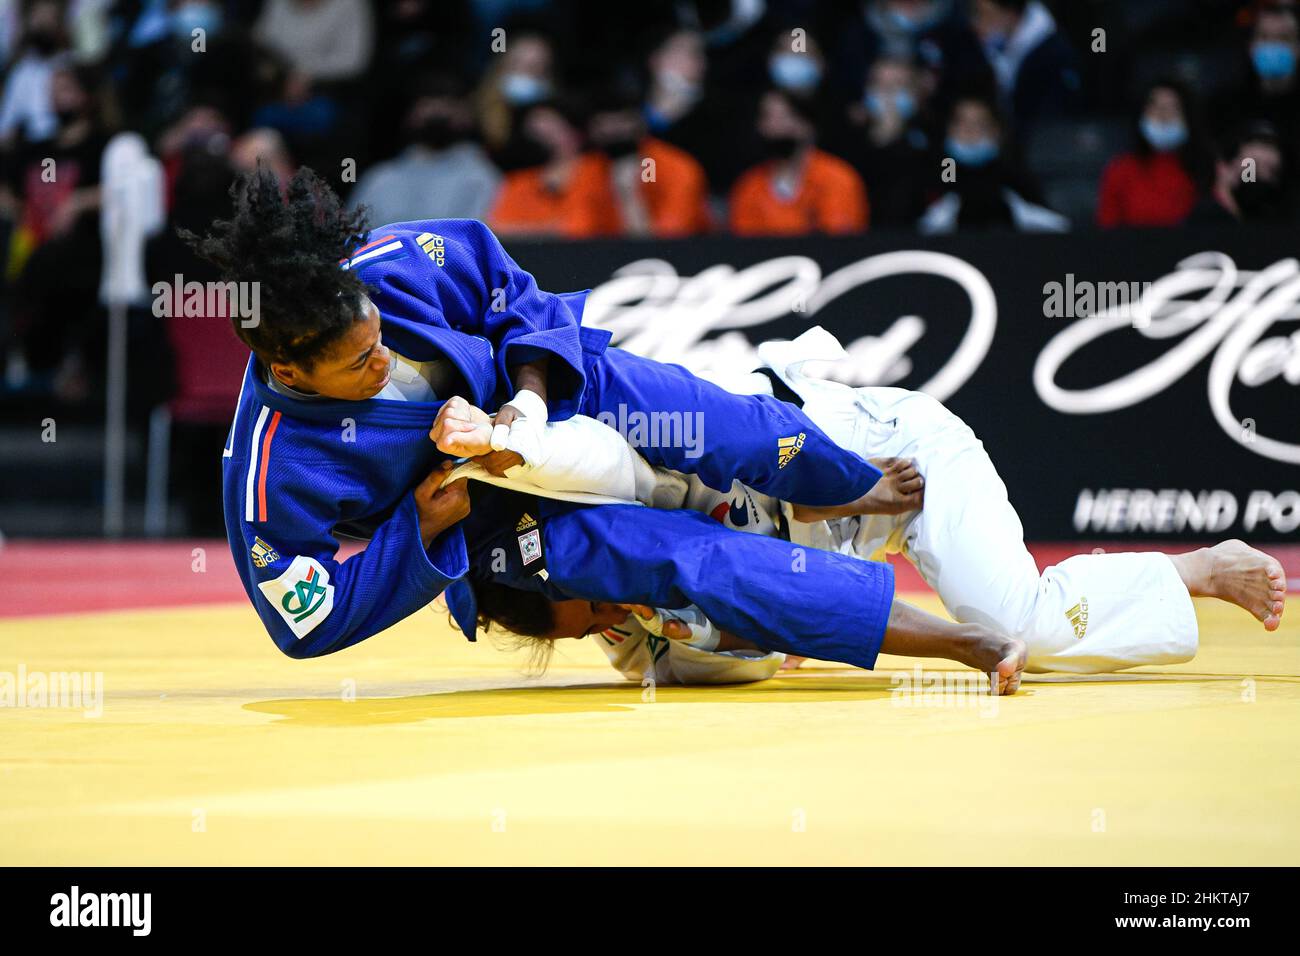 Women's -57 kg, Sarah-Leonie Cysique (blue) of France competes and  wins by ippon over Faiza Mokdar of France with an armlock (juji gatame) during the Paris Grand Slam 2022, IJF World Judo Tour on February 5, 2022 at Accor Arena in Paris, France - Photo Victor Joly / DPPI Stock Photo